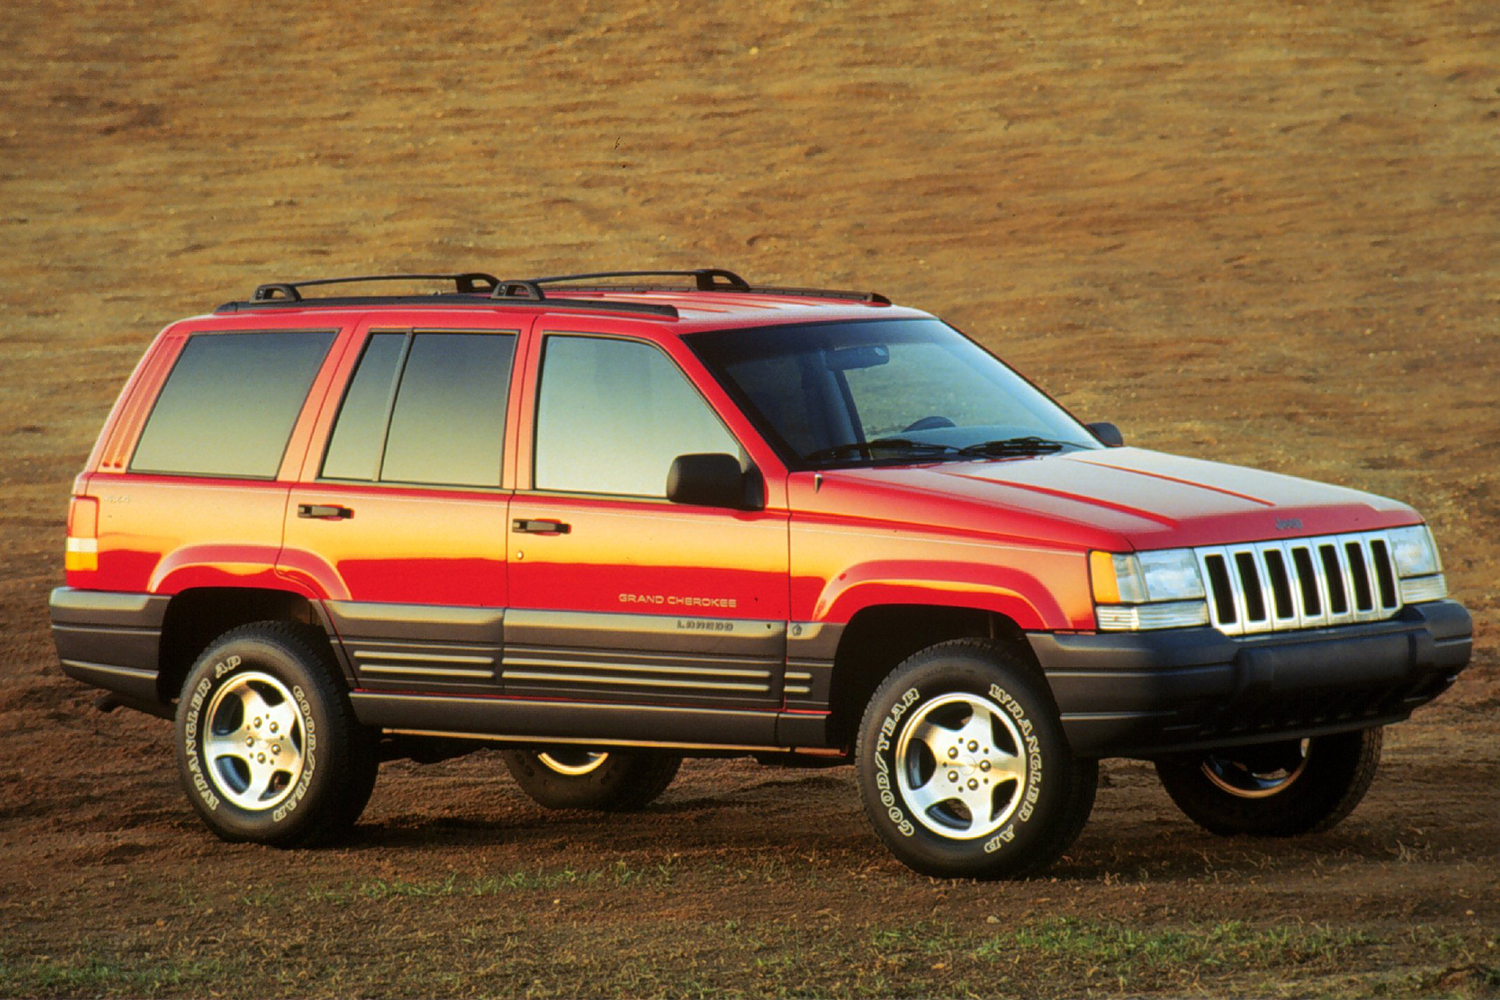 A 1996 Jeep Grand Cherokee Laredo in red sitting on the dirt in a vintage photo